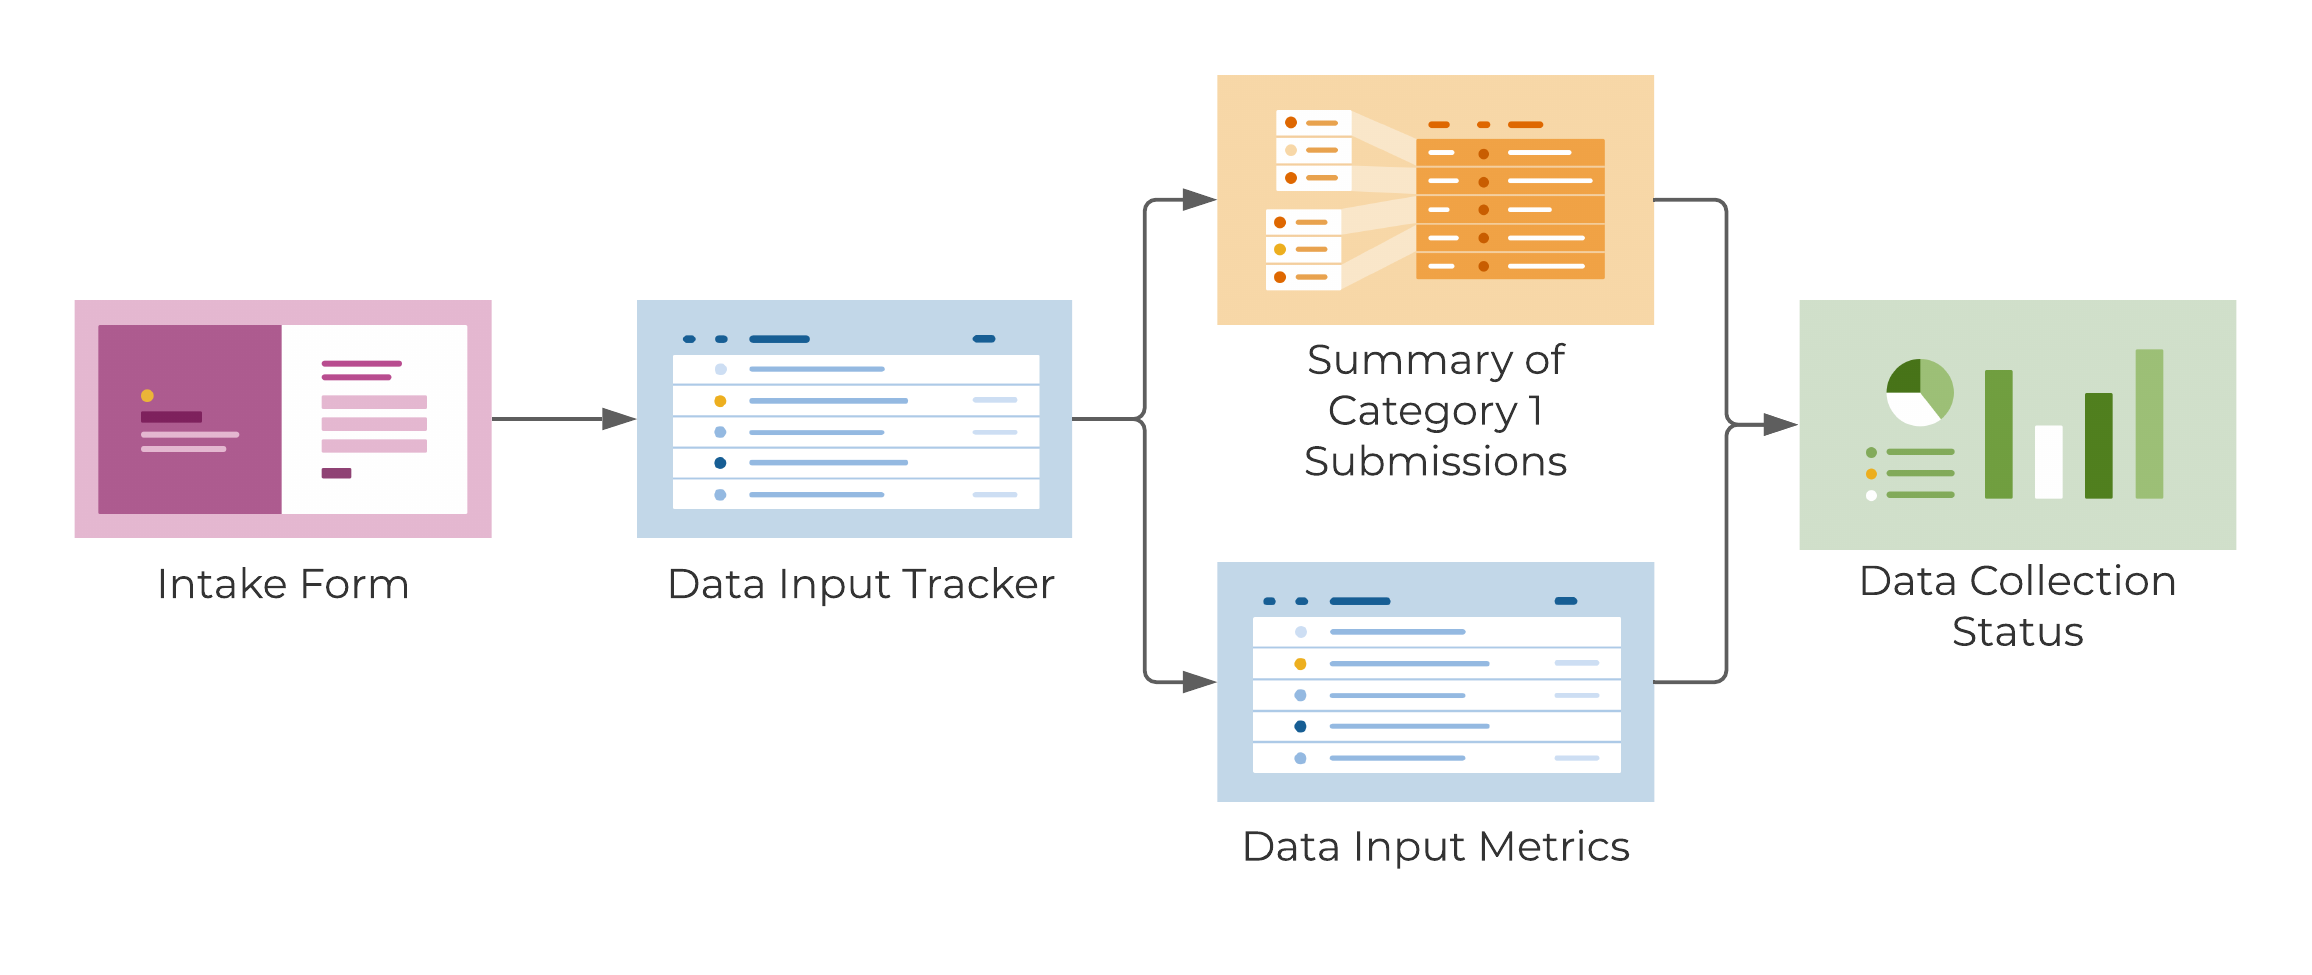 Template Set Flow Chart - Data Input and Data Collection